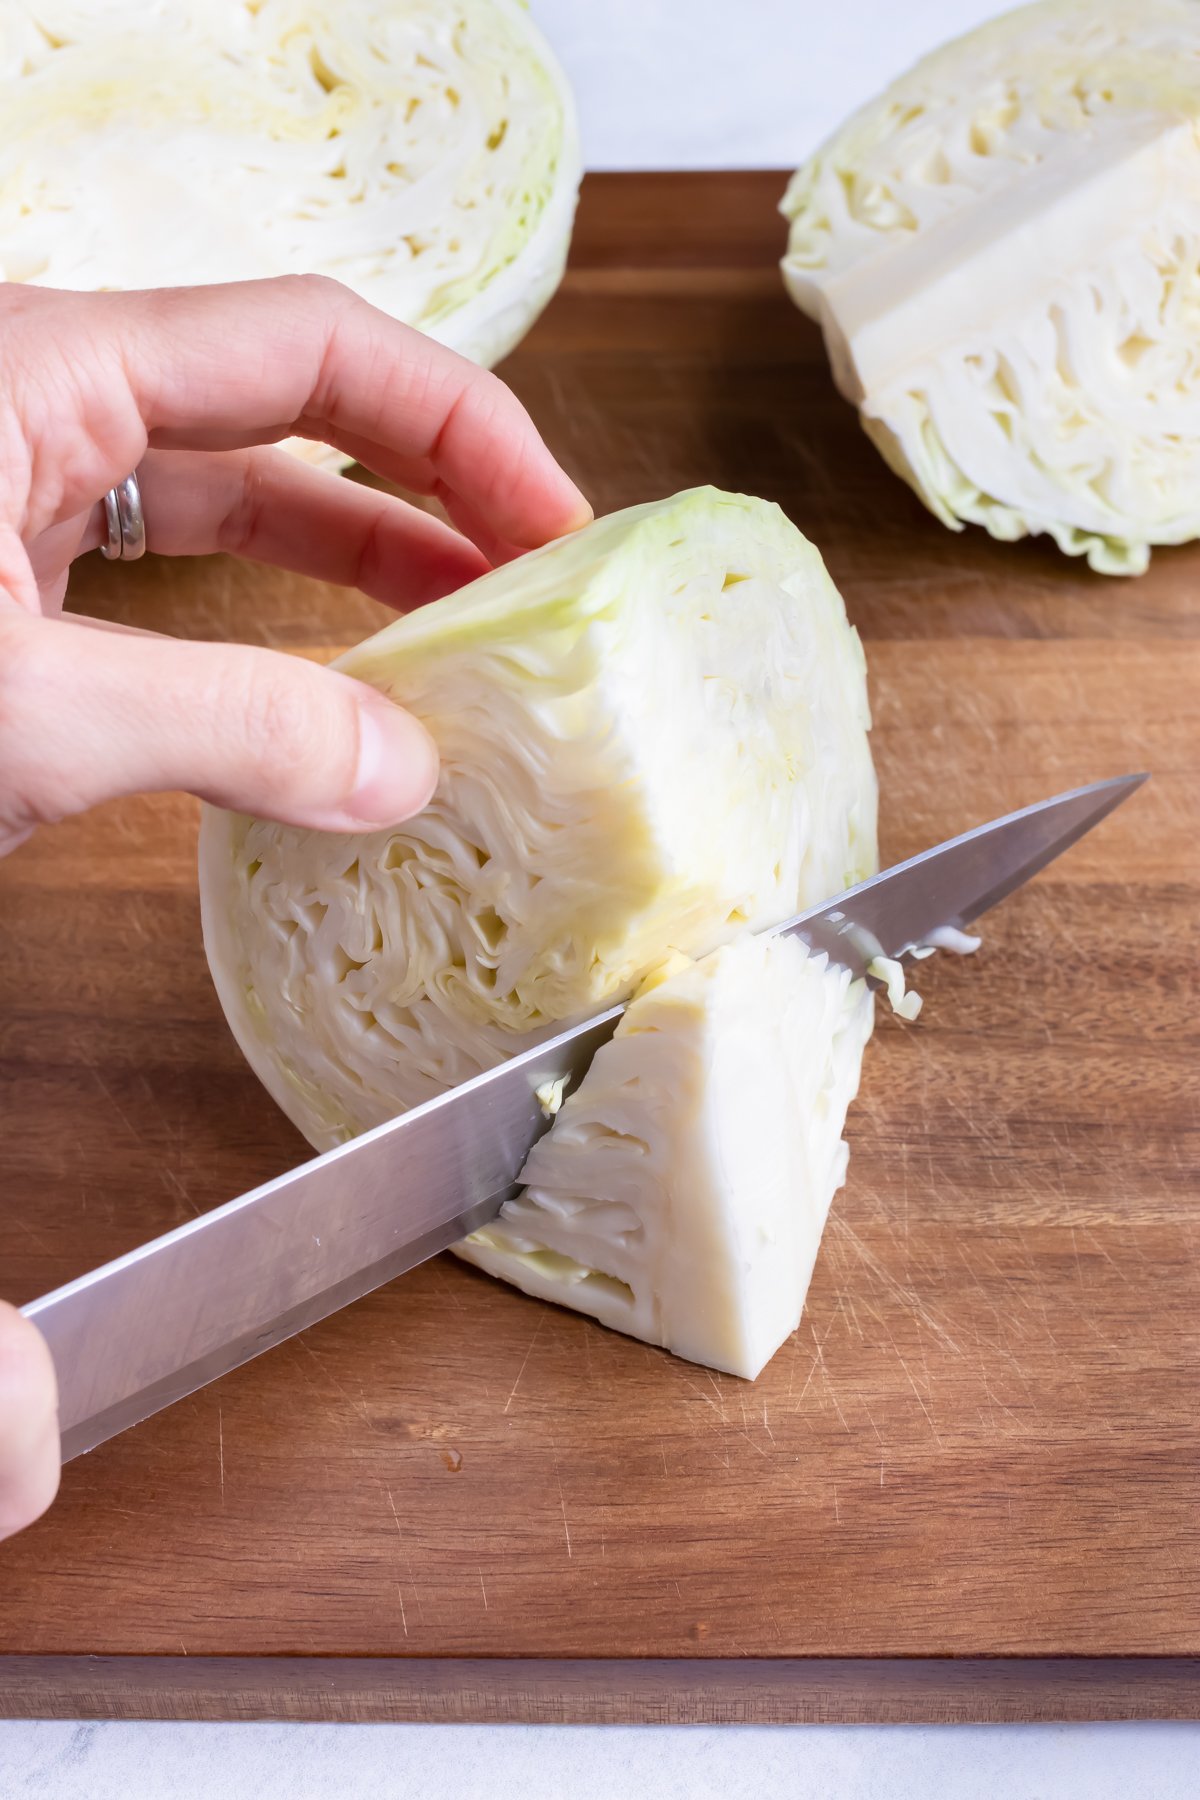 Removing the core of the cabbage by cutting at an angle with a knife.